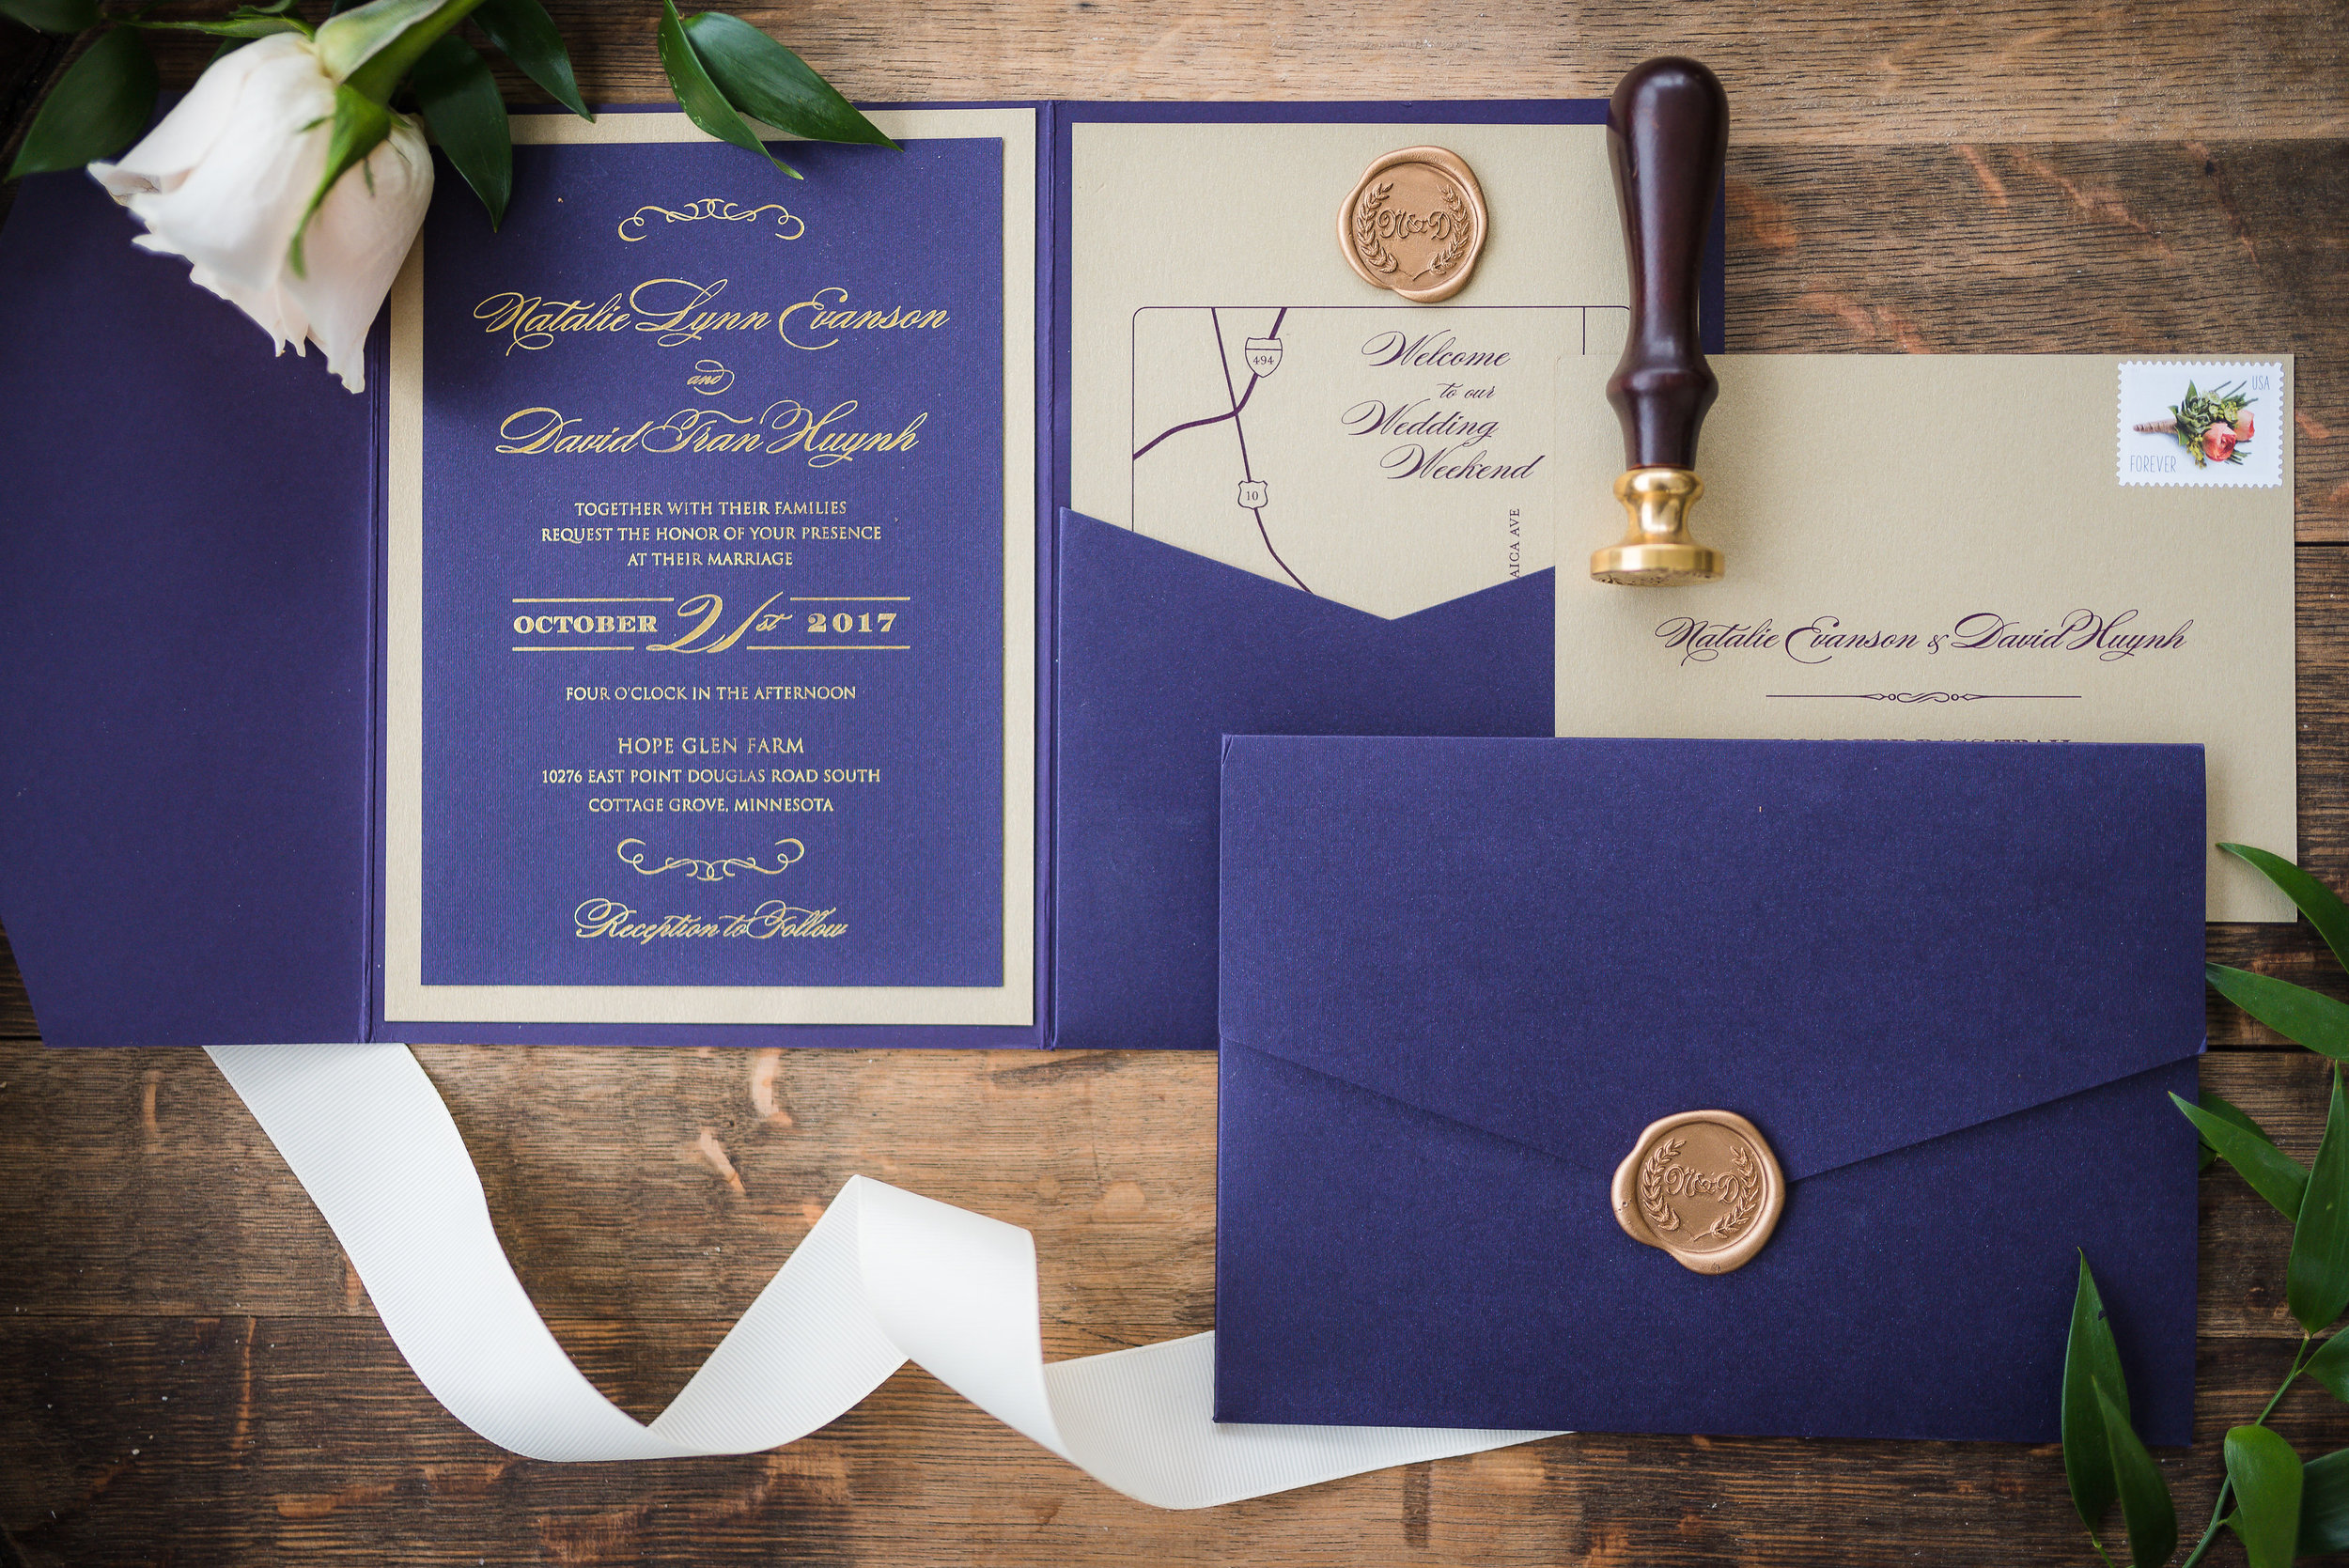 Eggplant on Gold foil is always a beautiful and classic choice